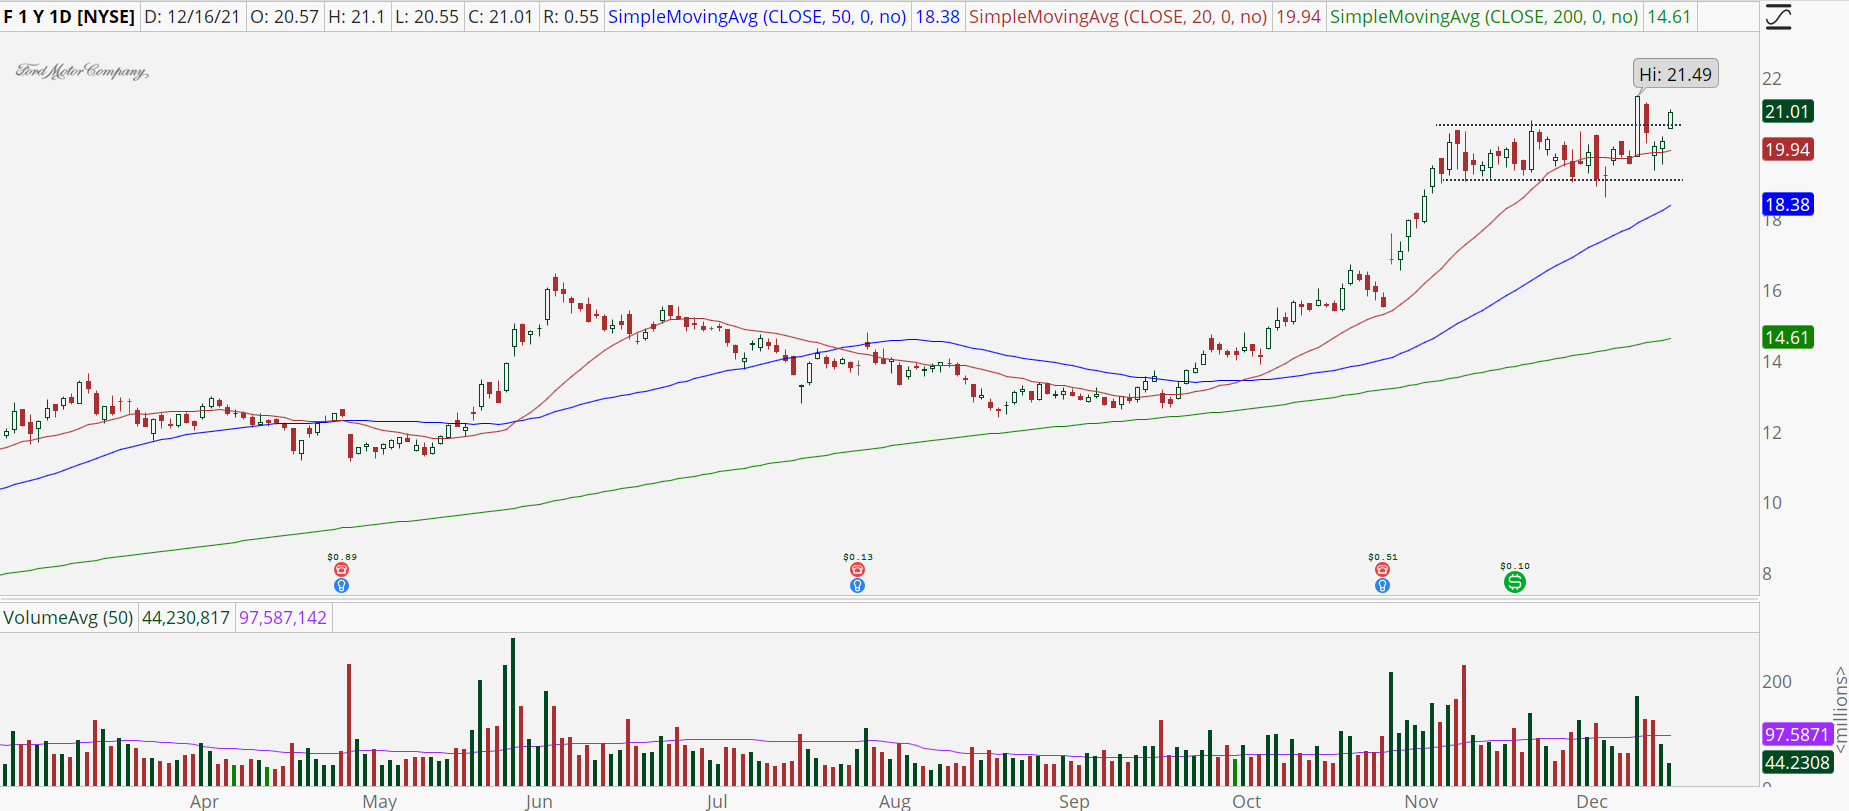 Ford (F) stock daily chart with high base breakout.